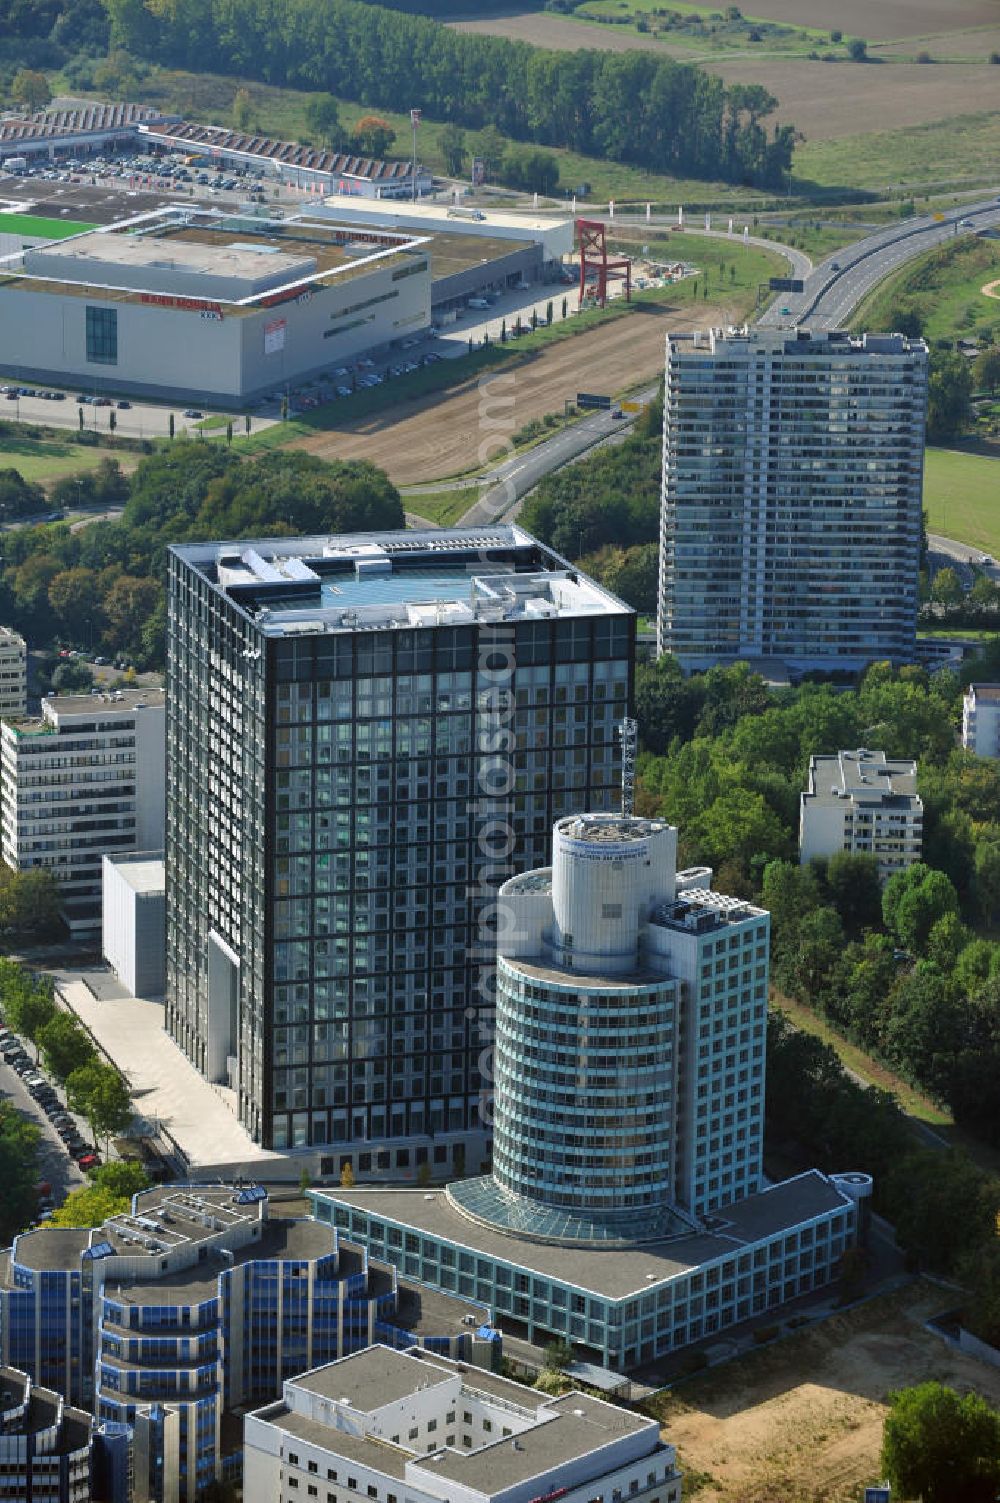 Aerial photograph Eschborn - View at the commercial area Süd inEschborn with the office building Taunus Tower and the branch of the German stocks exchange, which was opened in 2010. In the background is the motor way drive and a furniture store on the ground of the former Camp Phoenix of the US Army